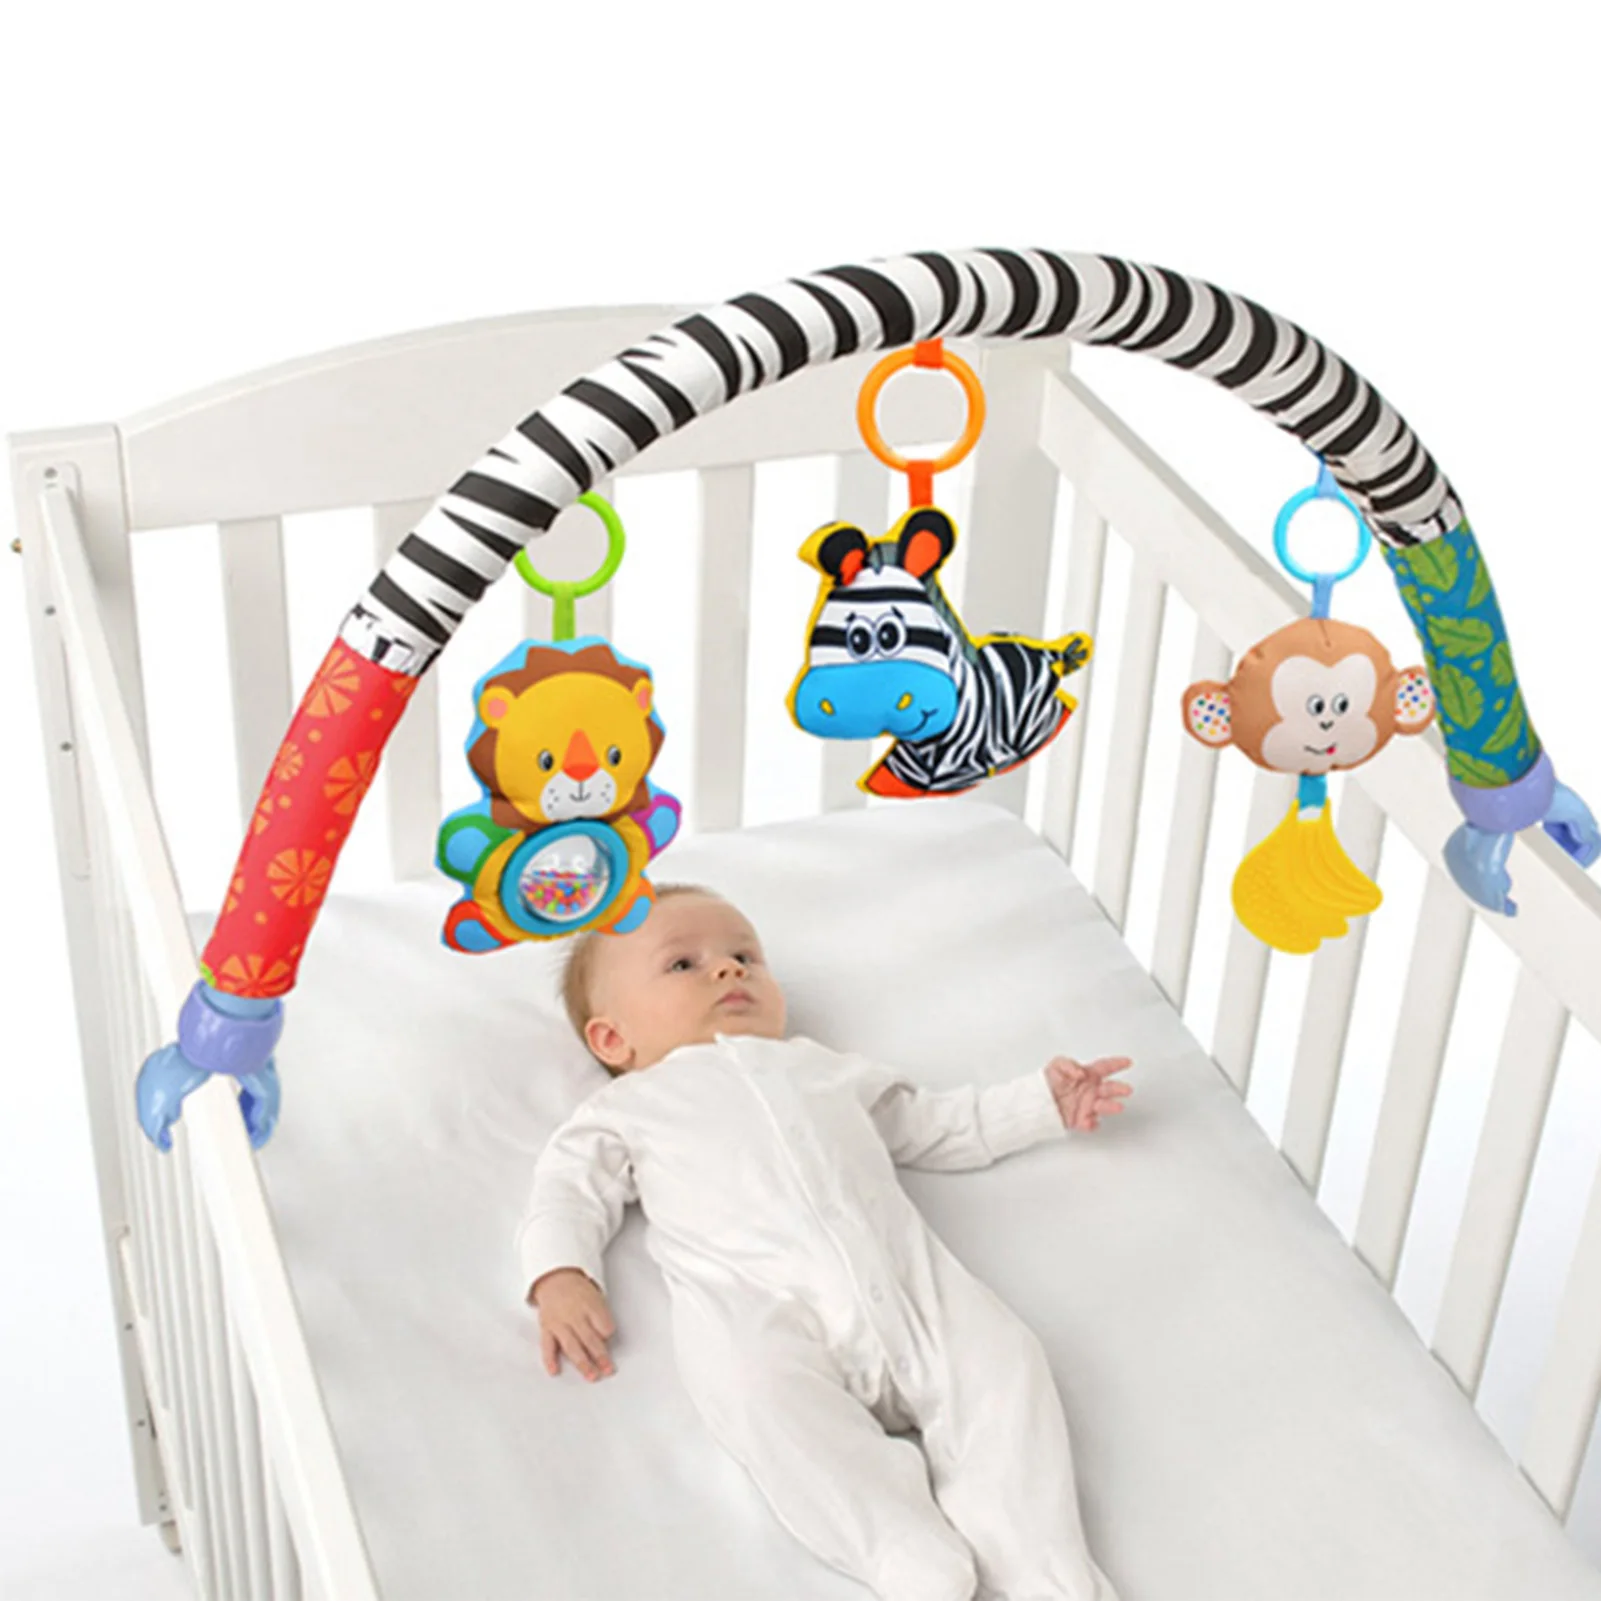 

Baby Travel Play Arch Stroller Activity Arch With Fascinating Toys Crib Accessory Cloth Animal Toy And Pram Activity Bar With